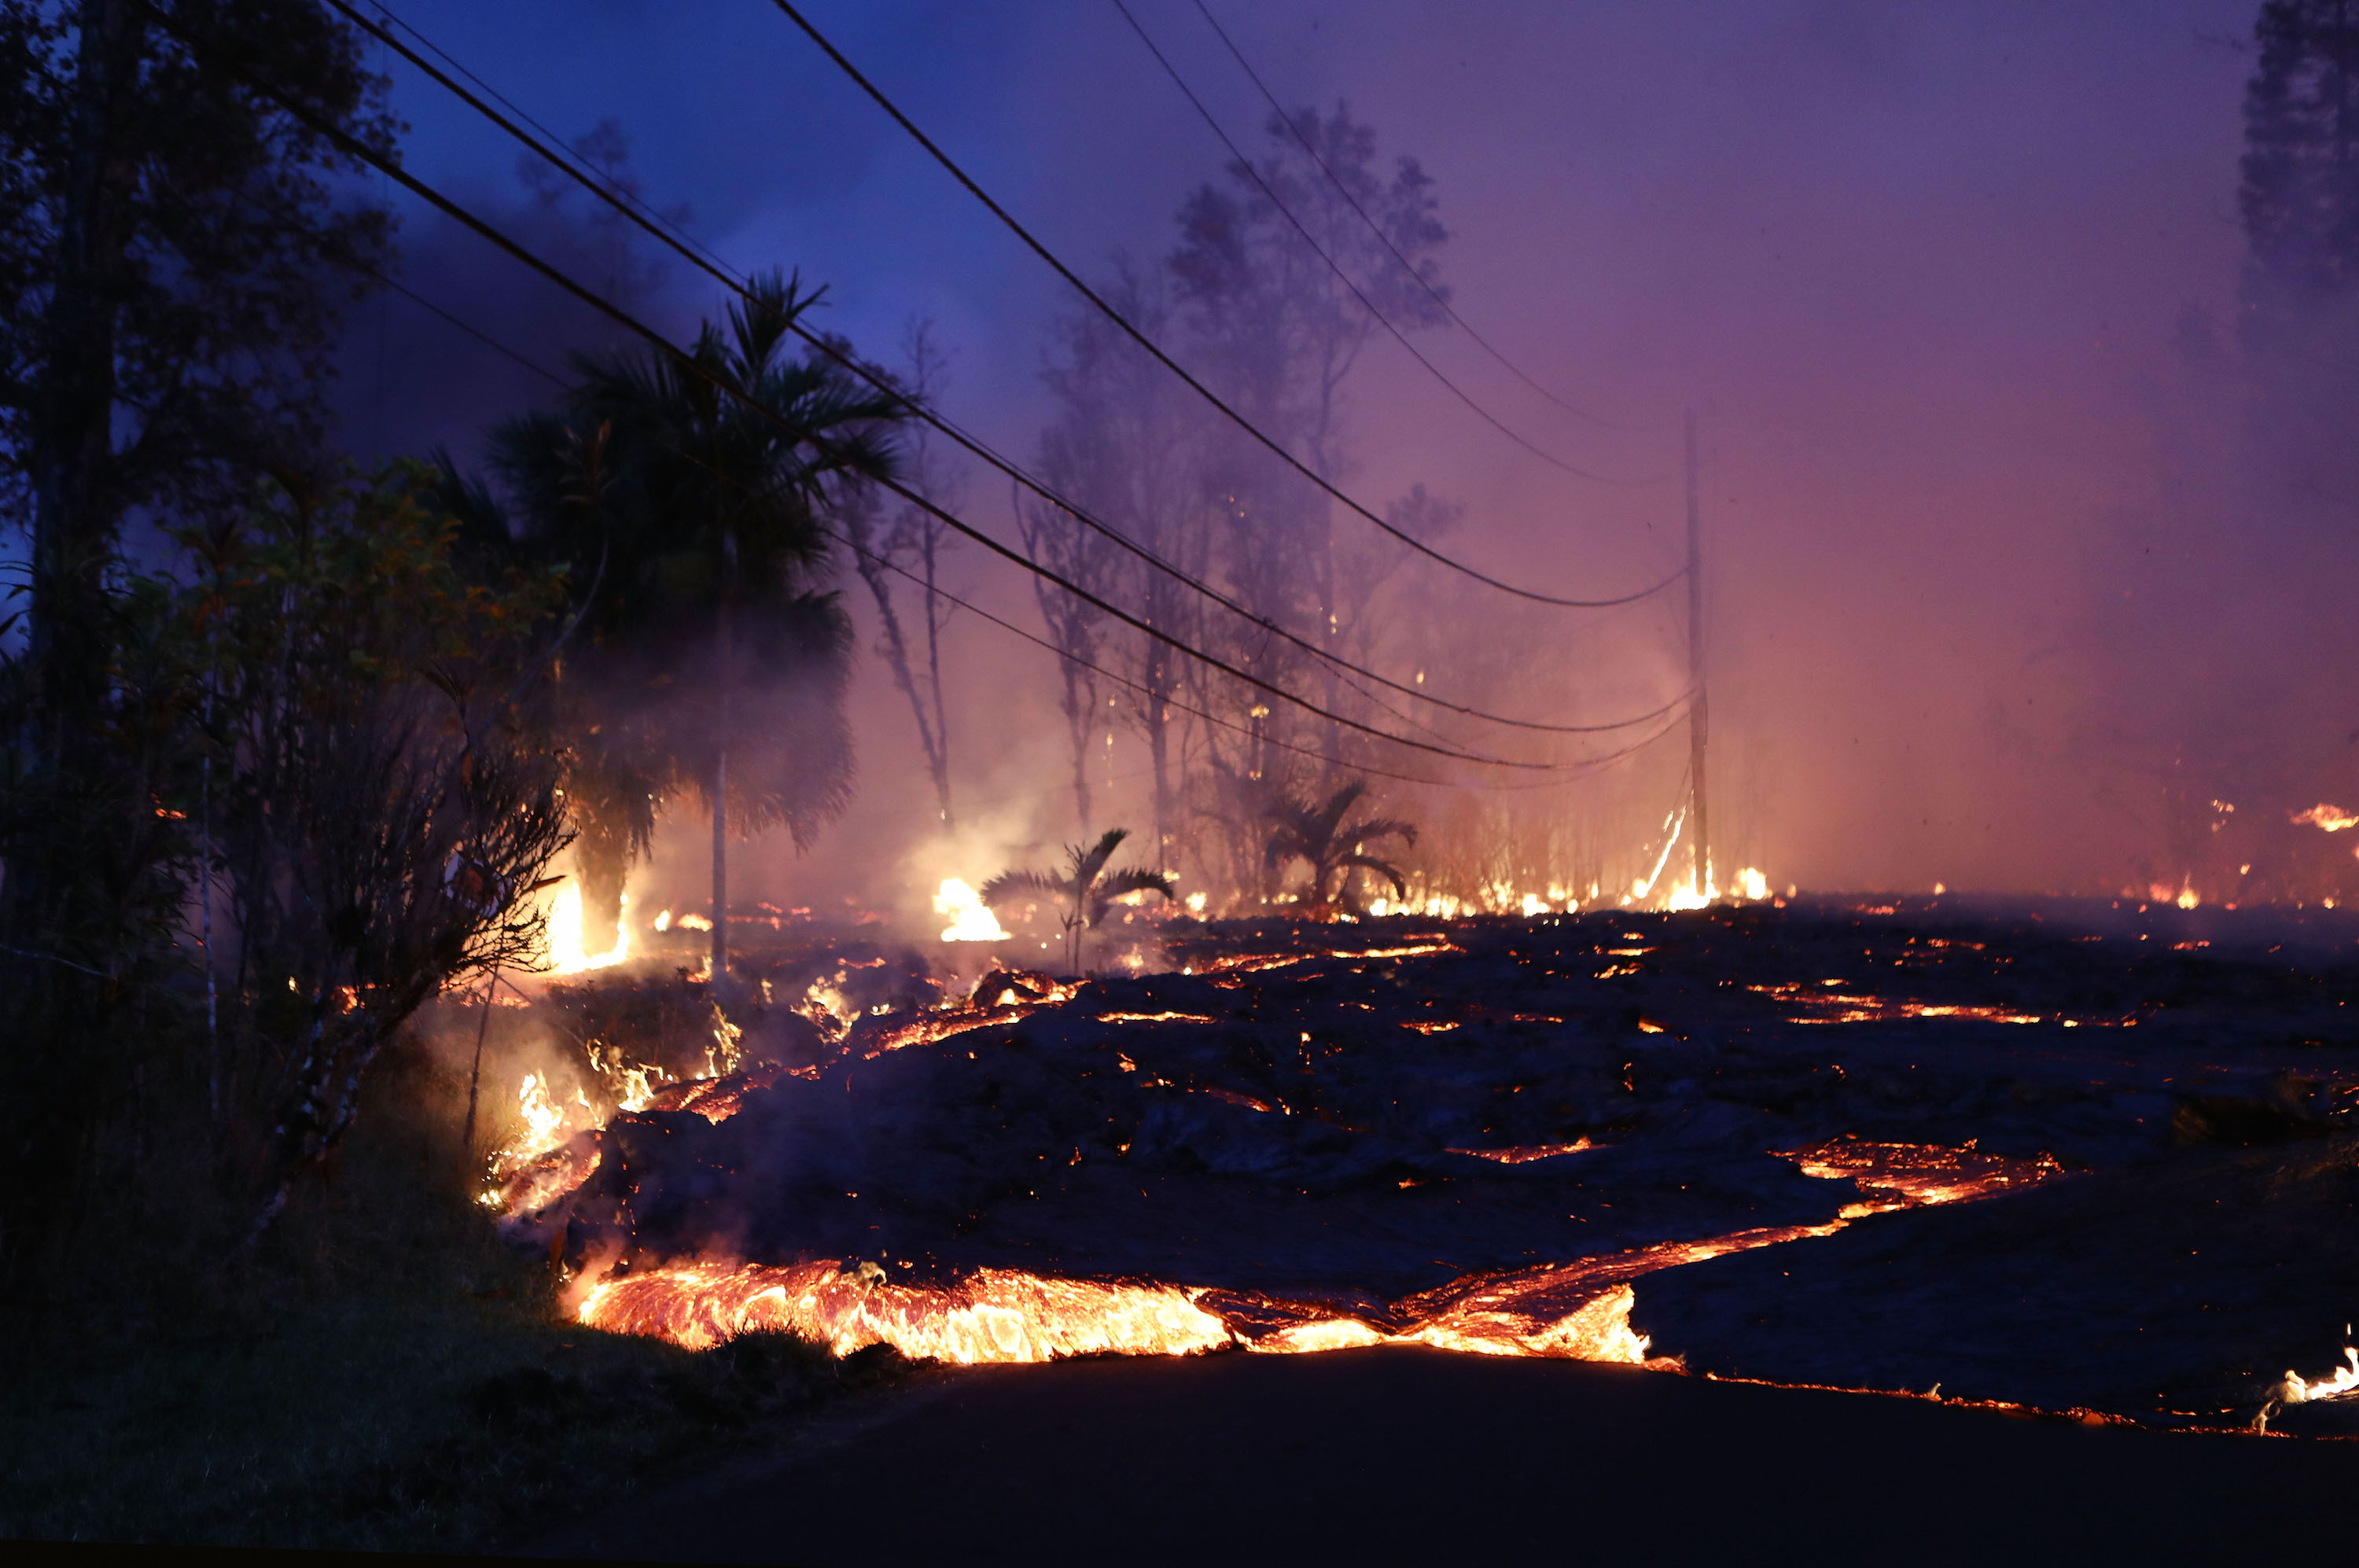 Drones Now Helping First Responders Save People in Hawaiian Lava Path